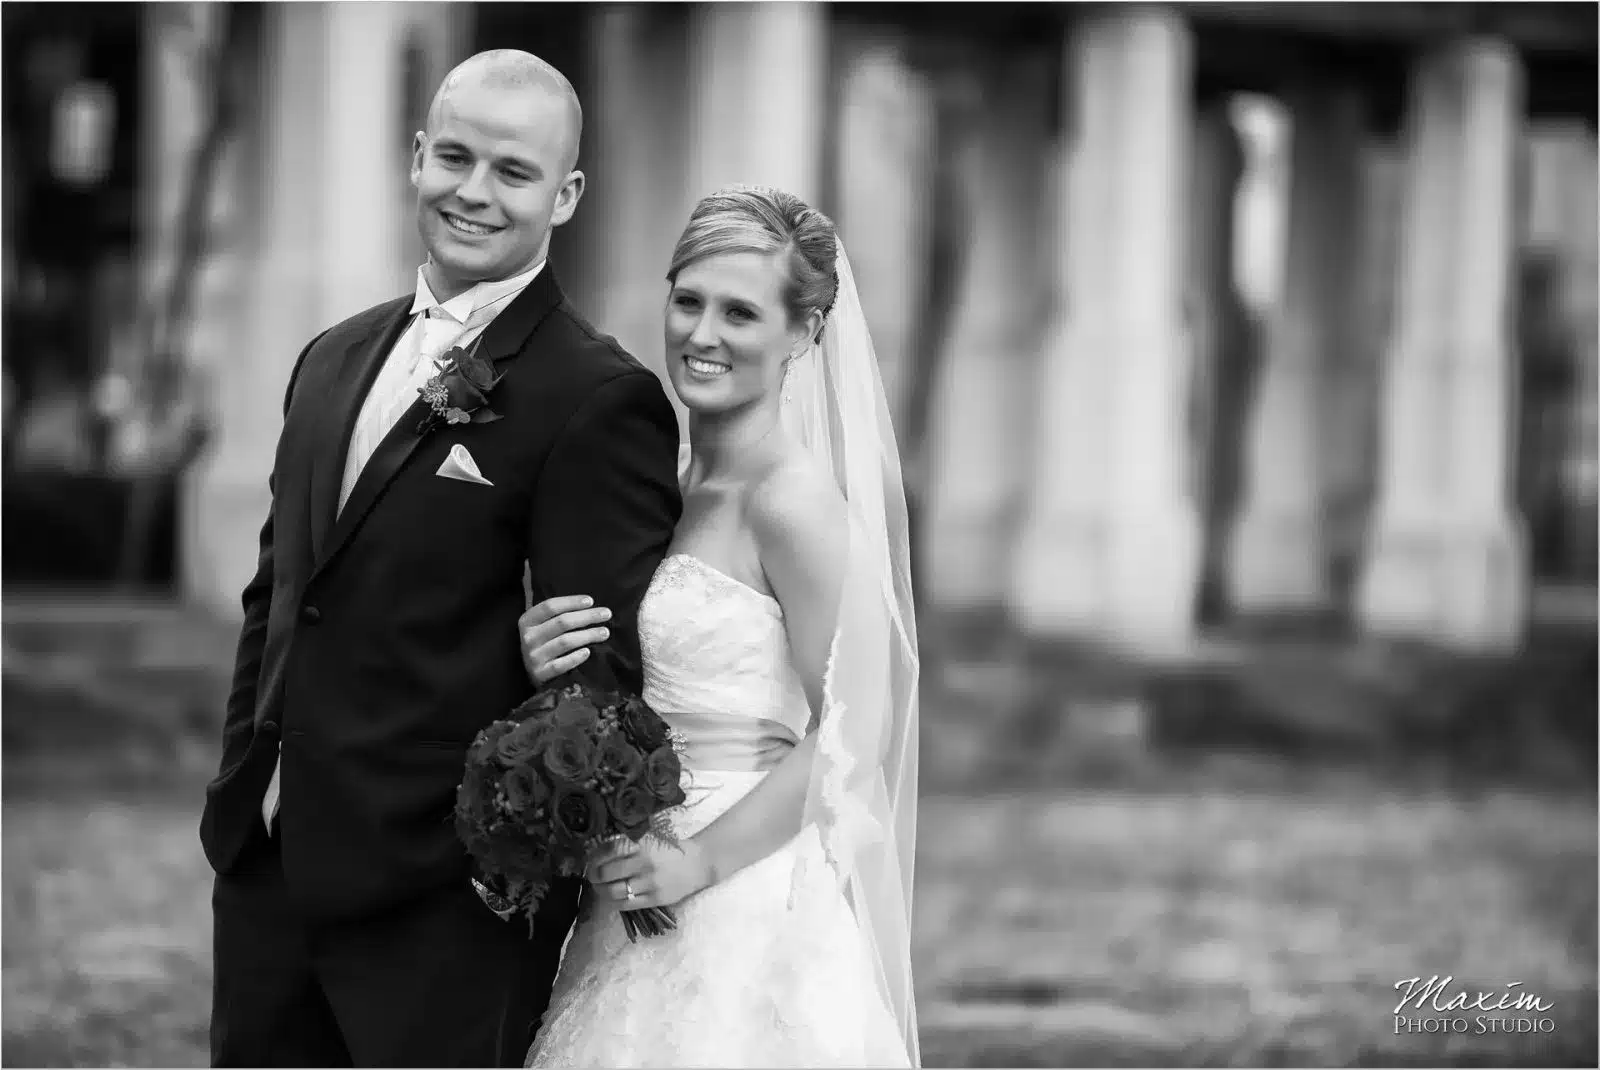 2013 Weddings Photography Review, 2013 Weddings Photography Review